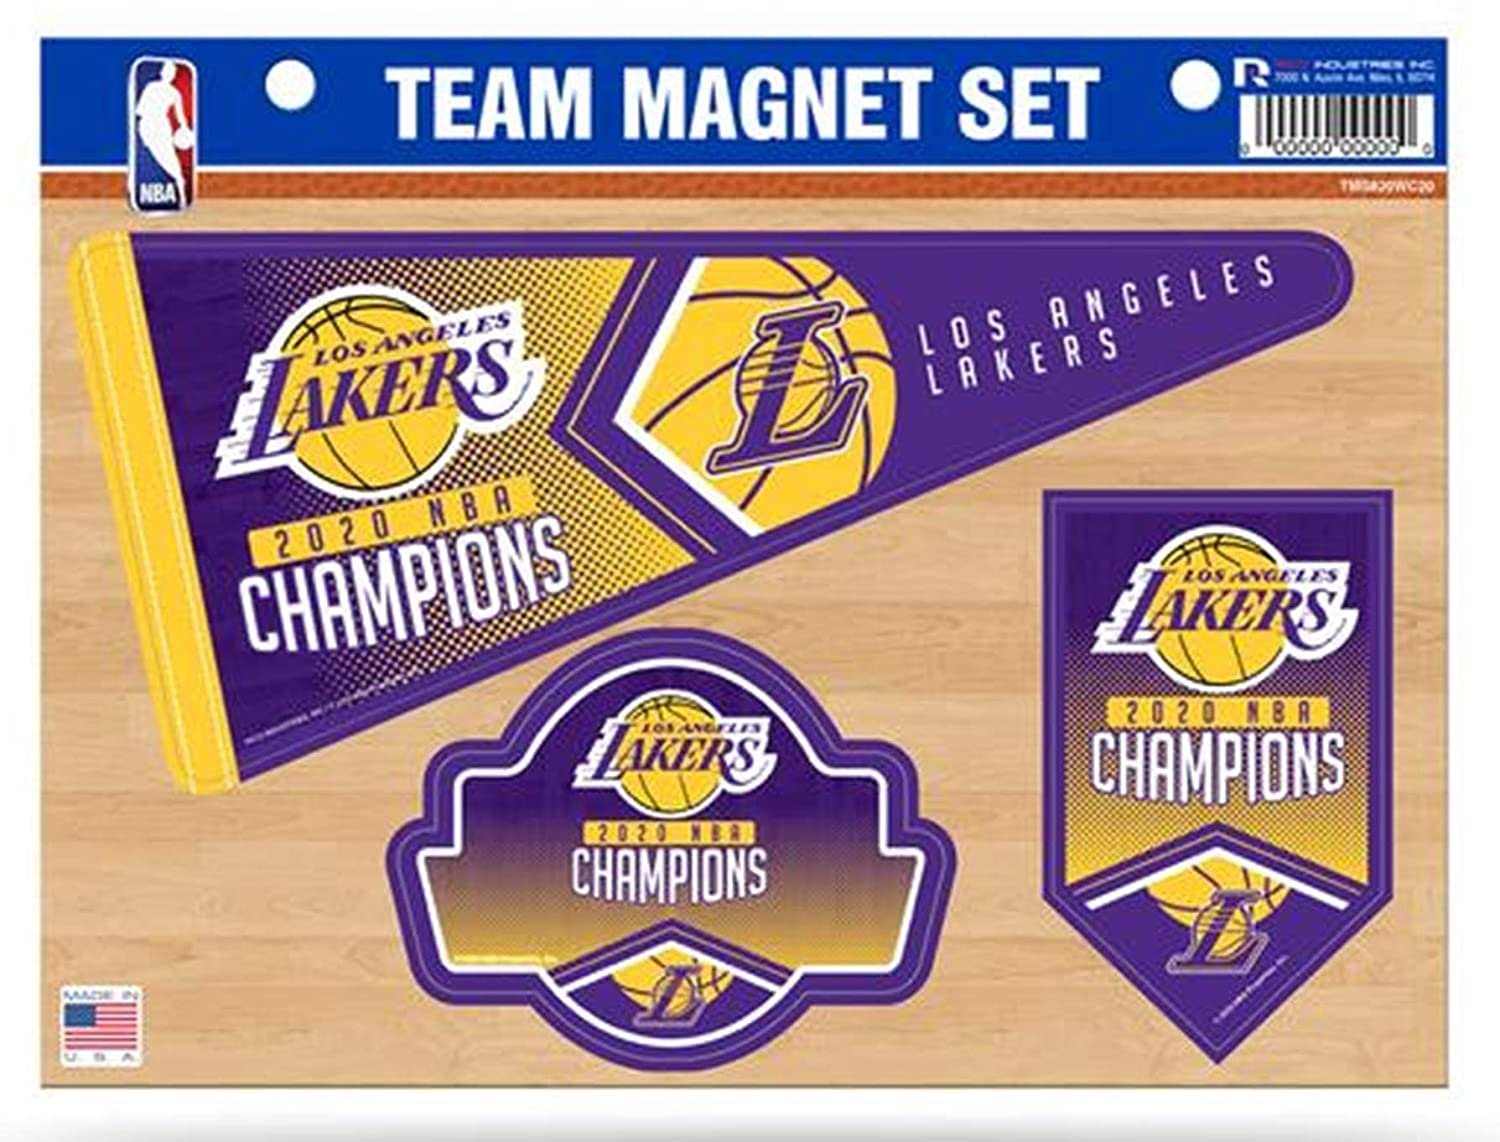 Los Angeles Lakers 2020 Champions Multi Die Cut Magnet Sheet Heavy Duty Auto Home